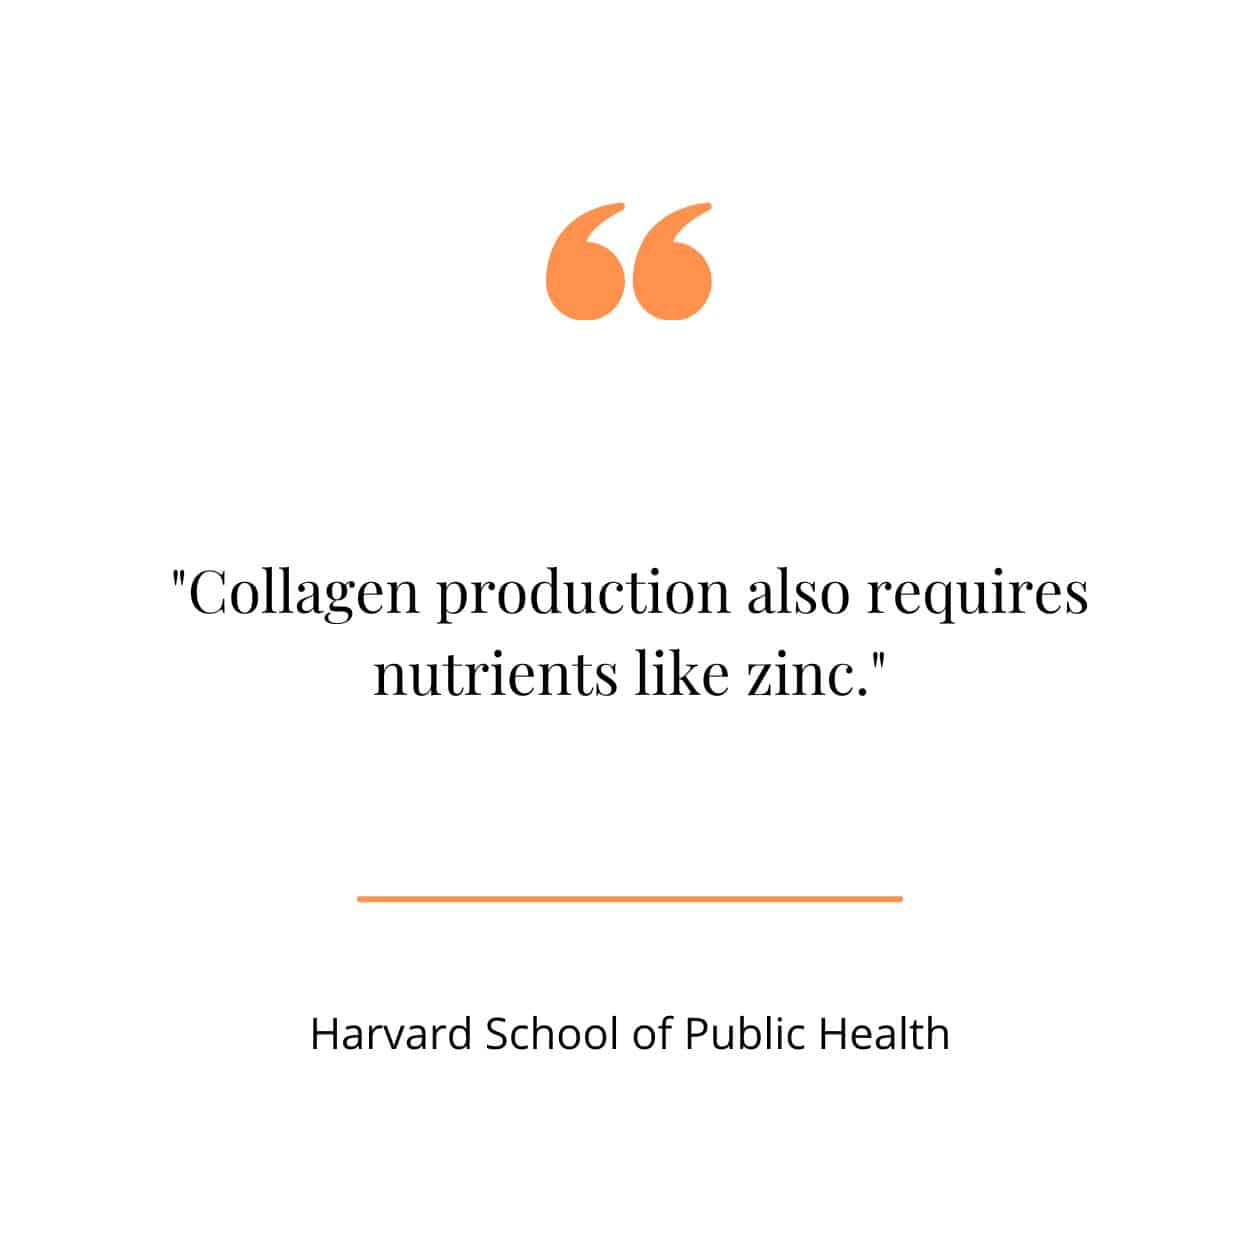 Zinc for collagen synthesis quote from Harvard School of Public Health.